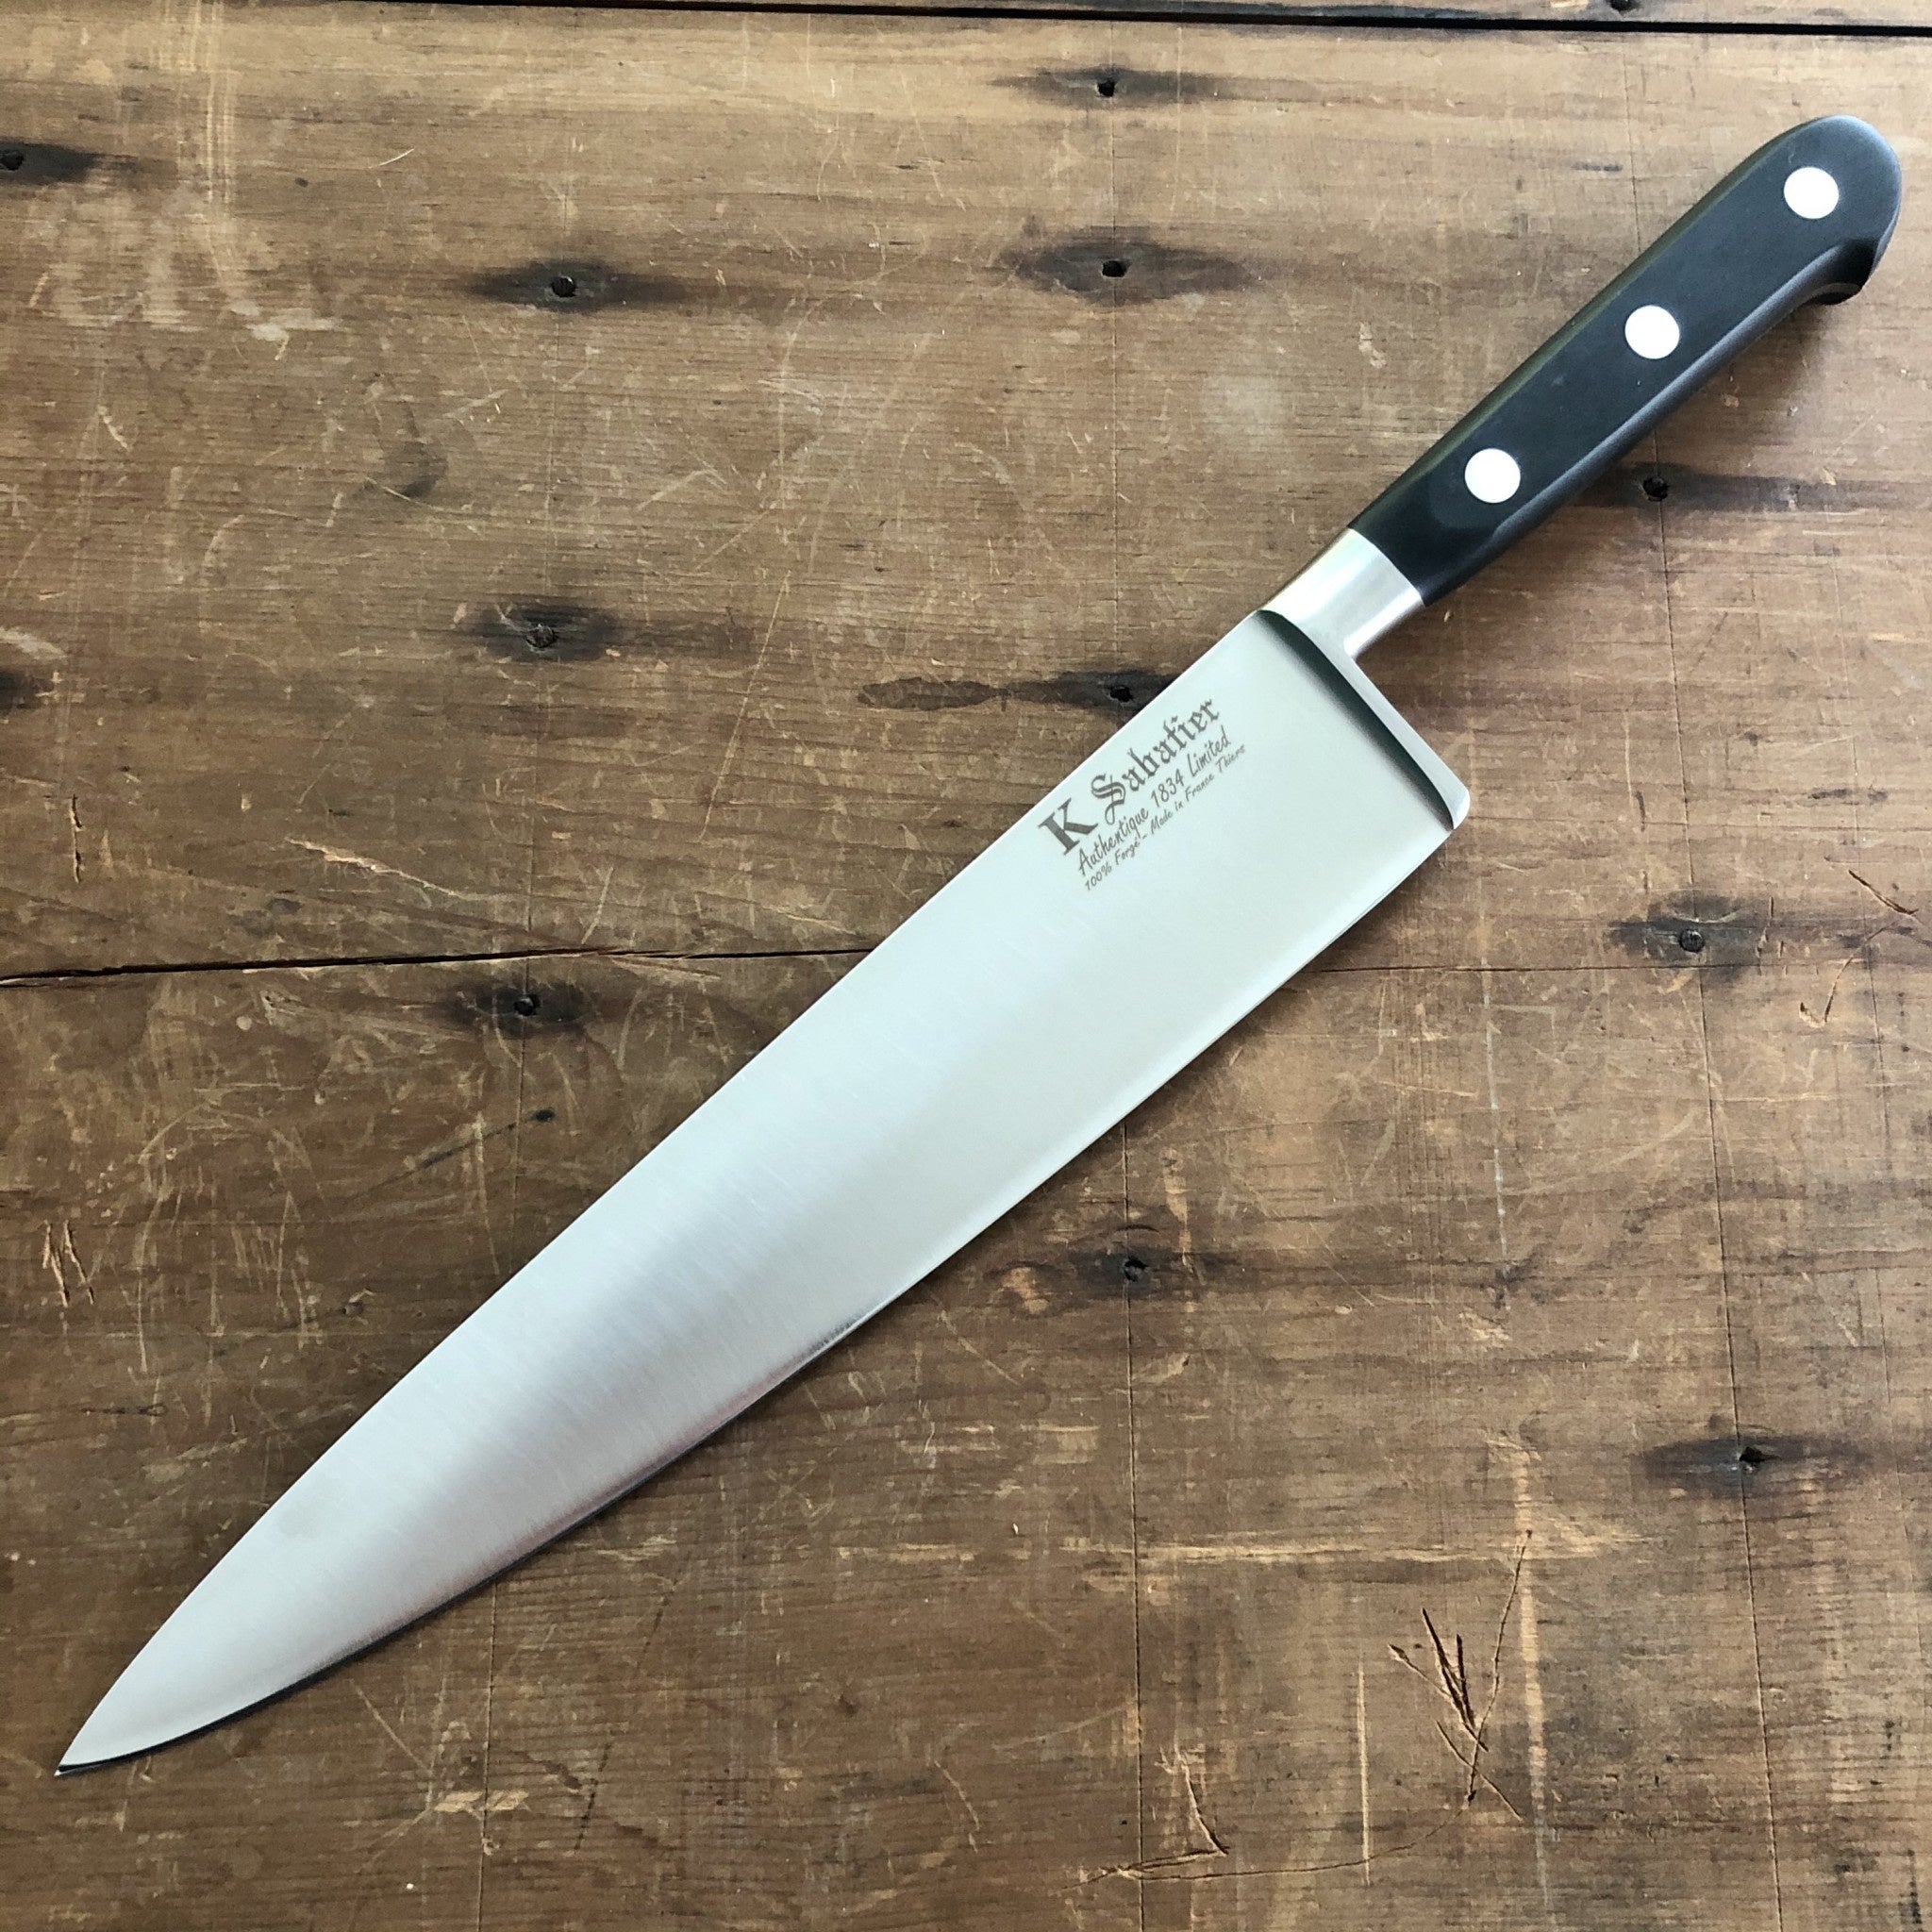 Chinese Style Chef's Knife - 8 inch, Cutlery